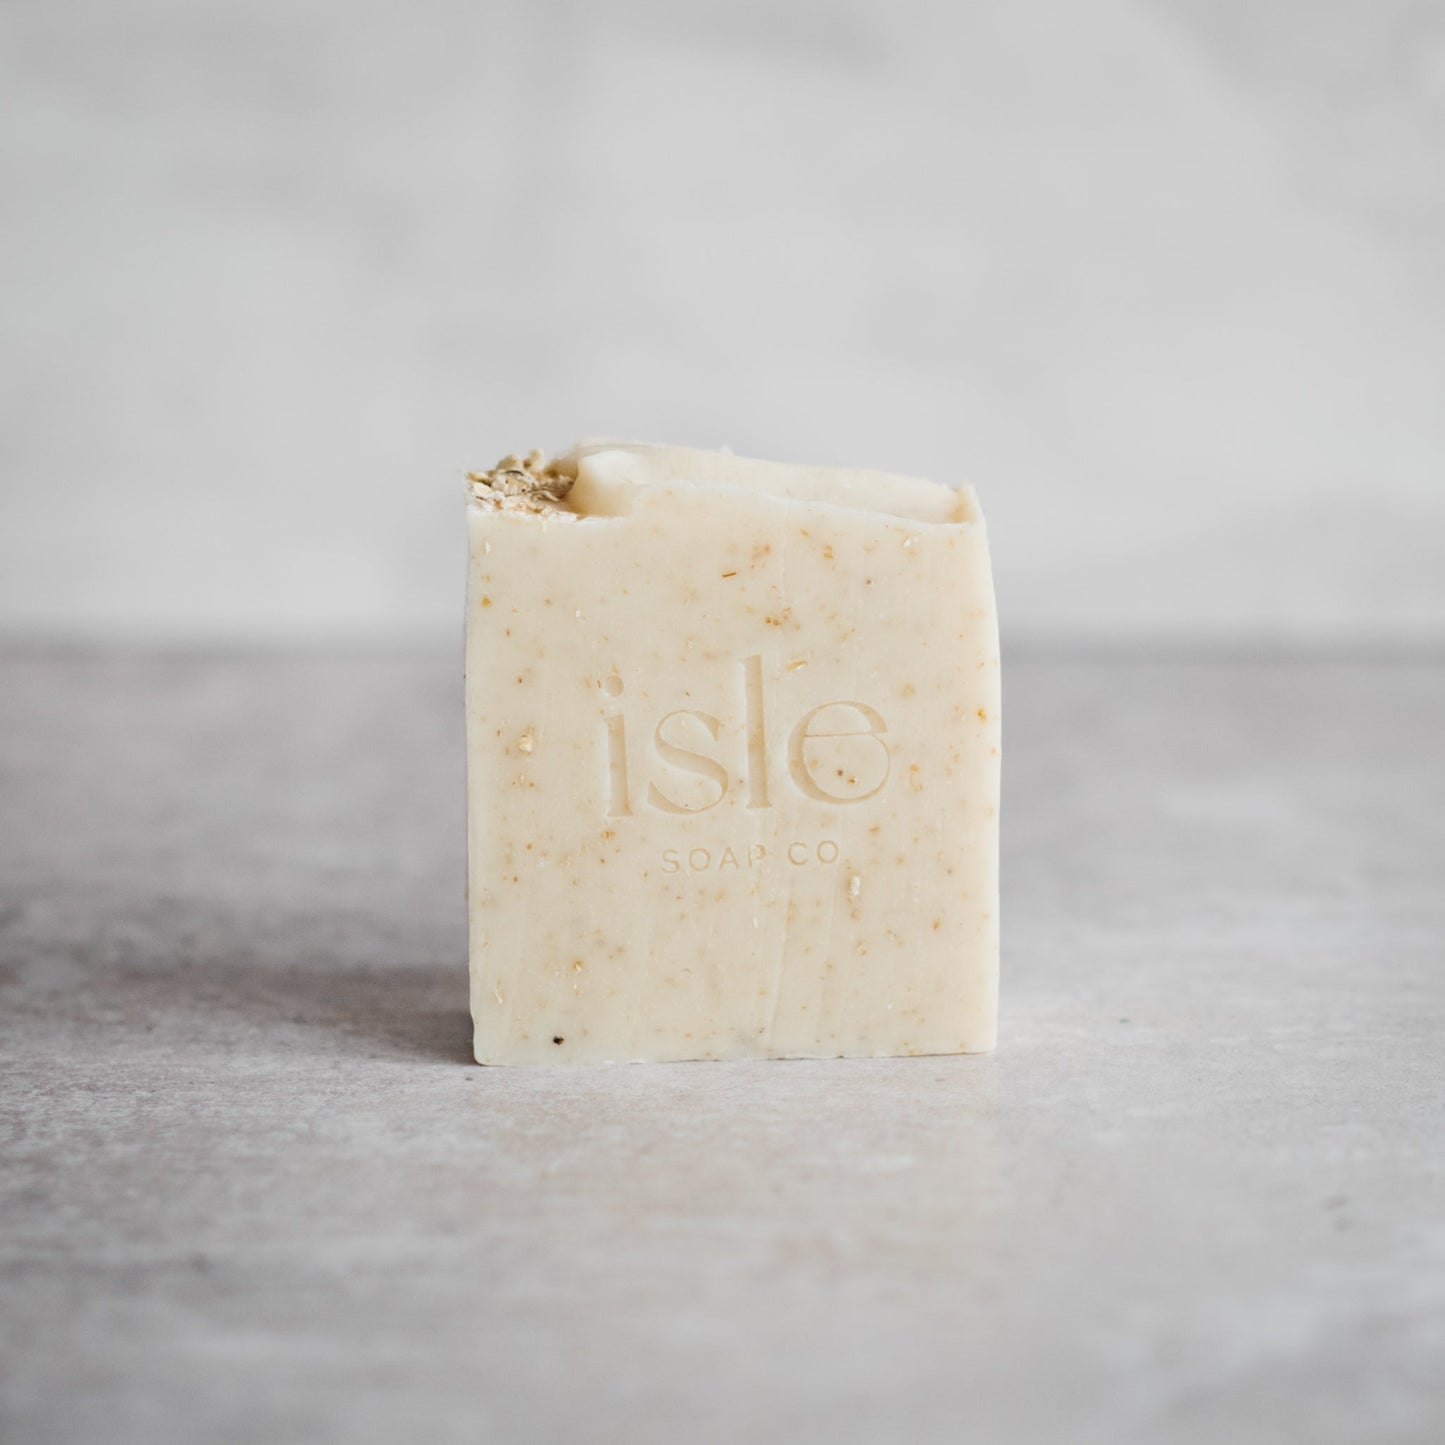 A square shaped block of soap, cream in colouring with a scattering of oats on top